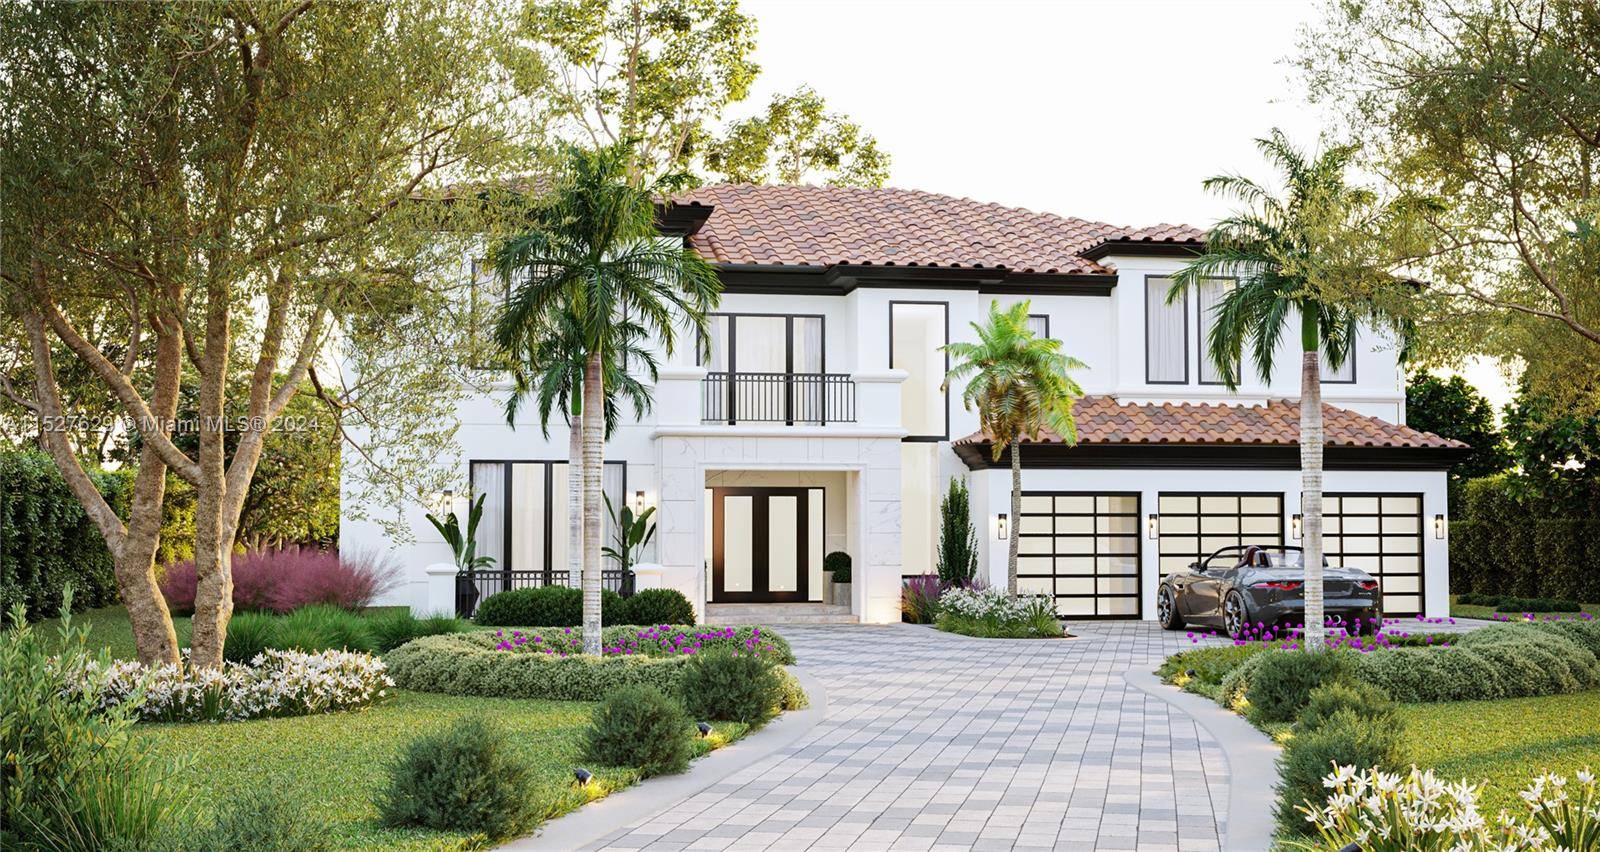 A modern and luxurious home in Davie.